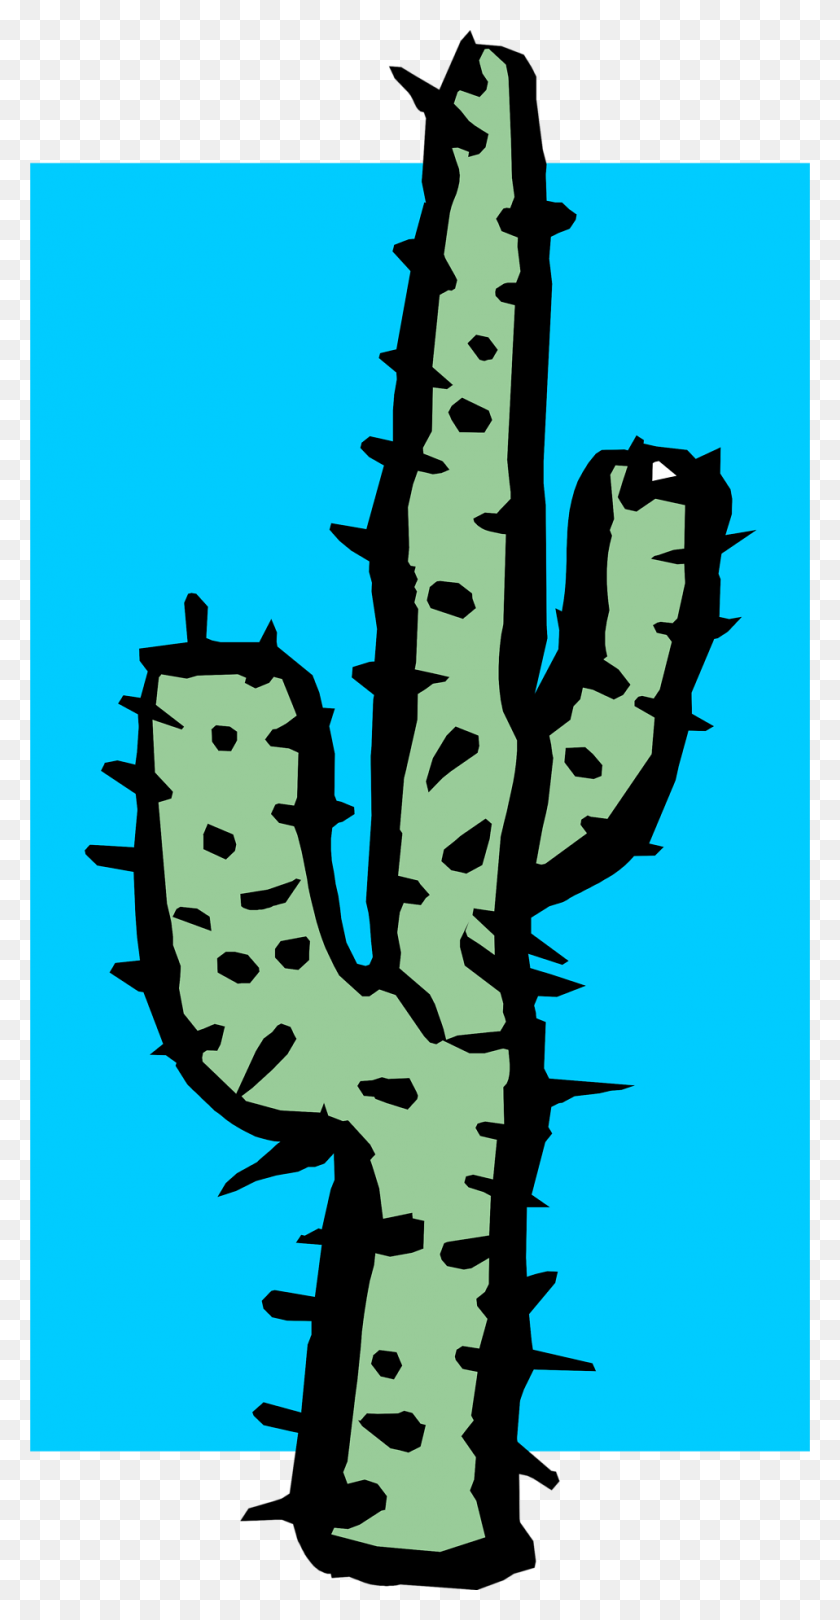 958x1916 Cactus Images Free Image Group - Mexican Cactus Clipart